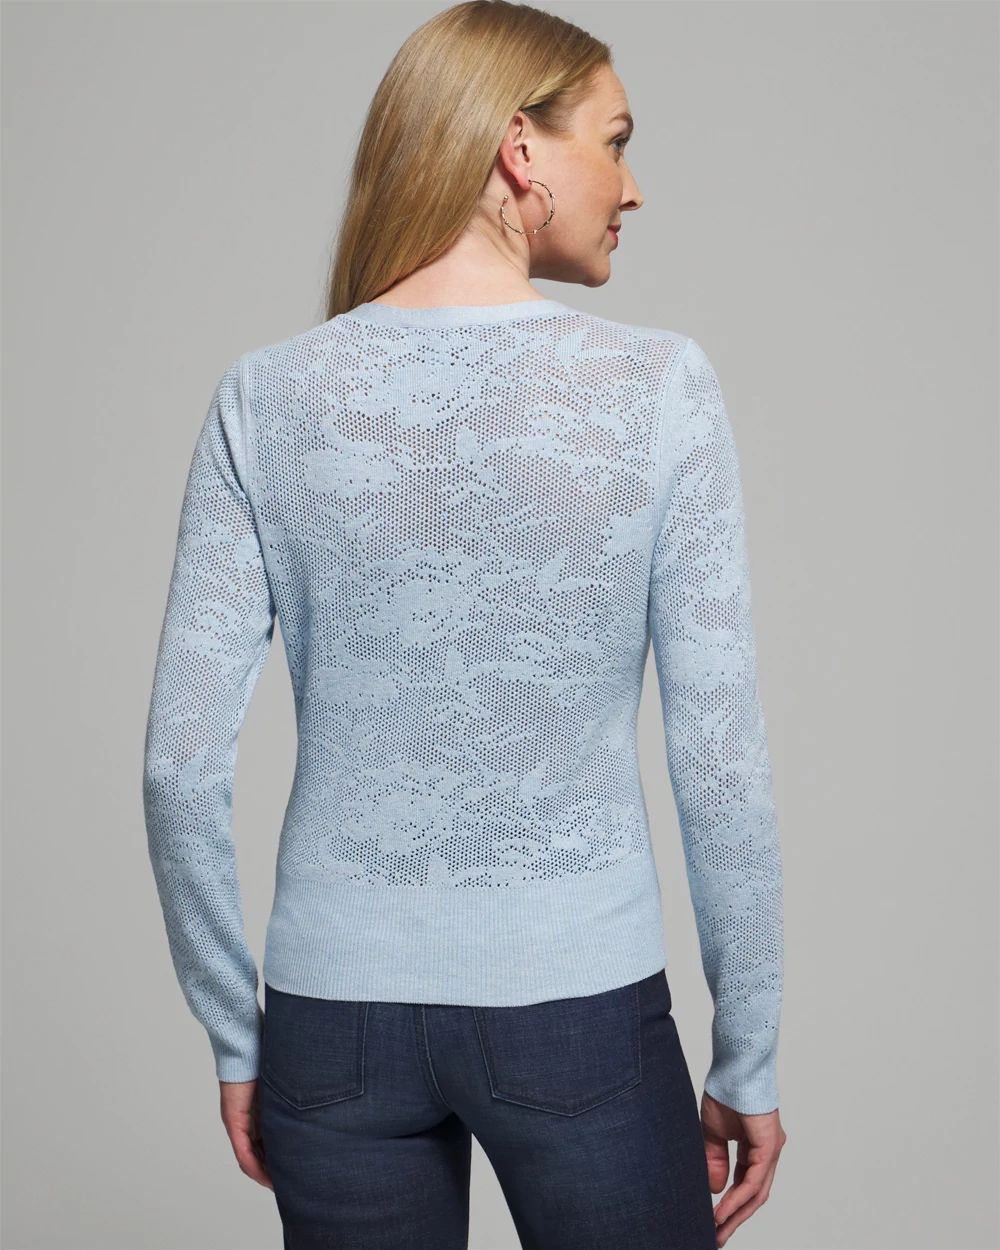 Outlet WHBM Pointelle Cardigan click to view larger image.